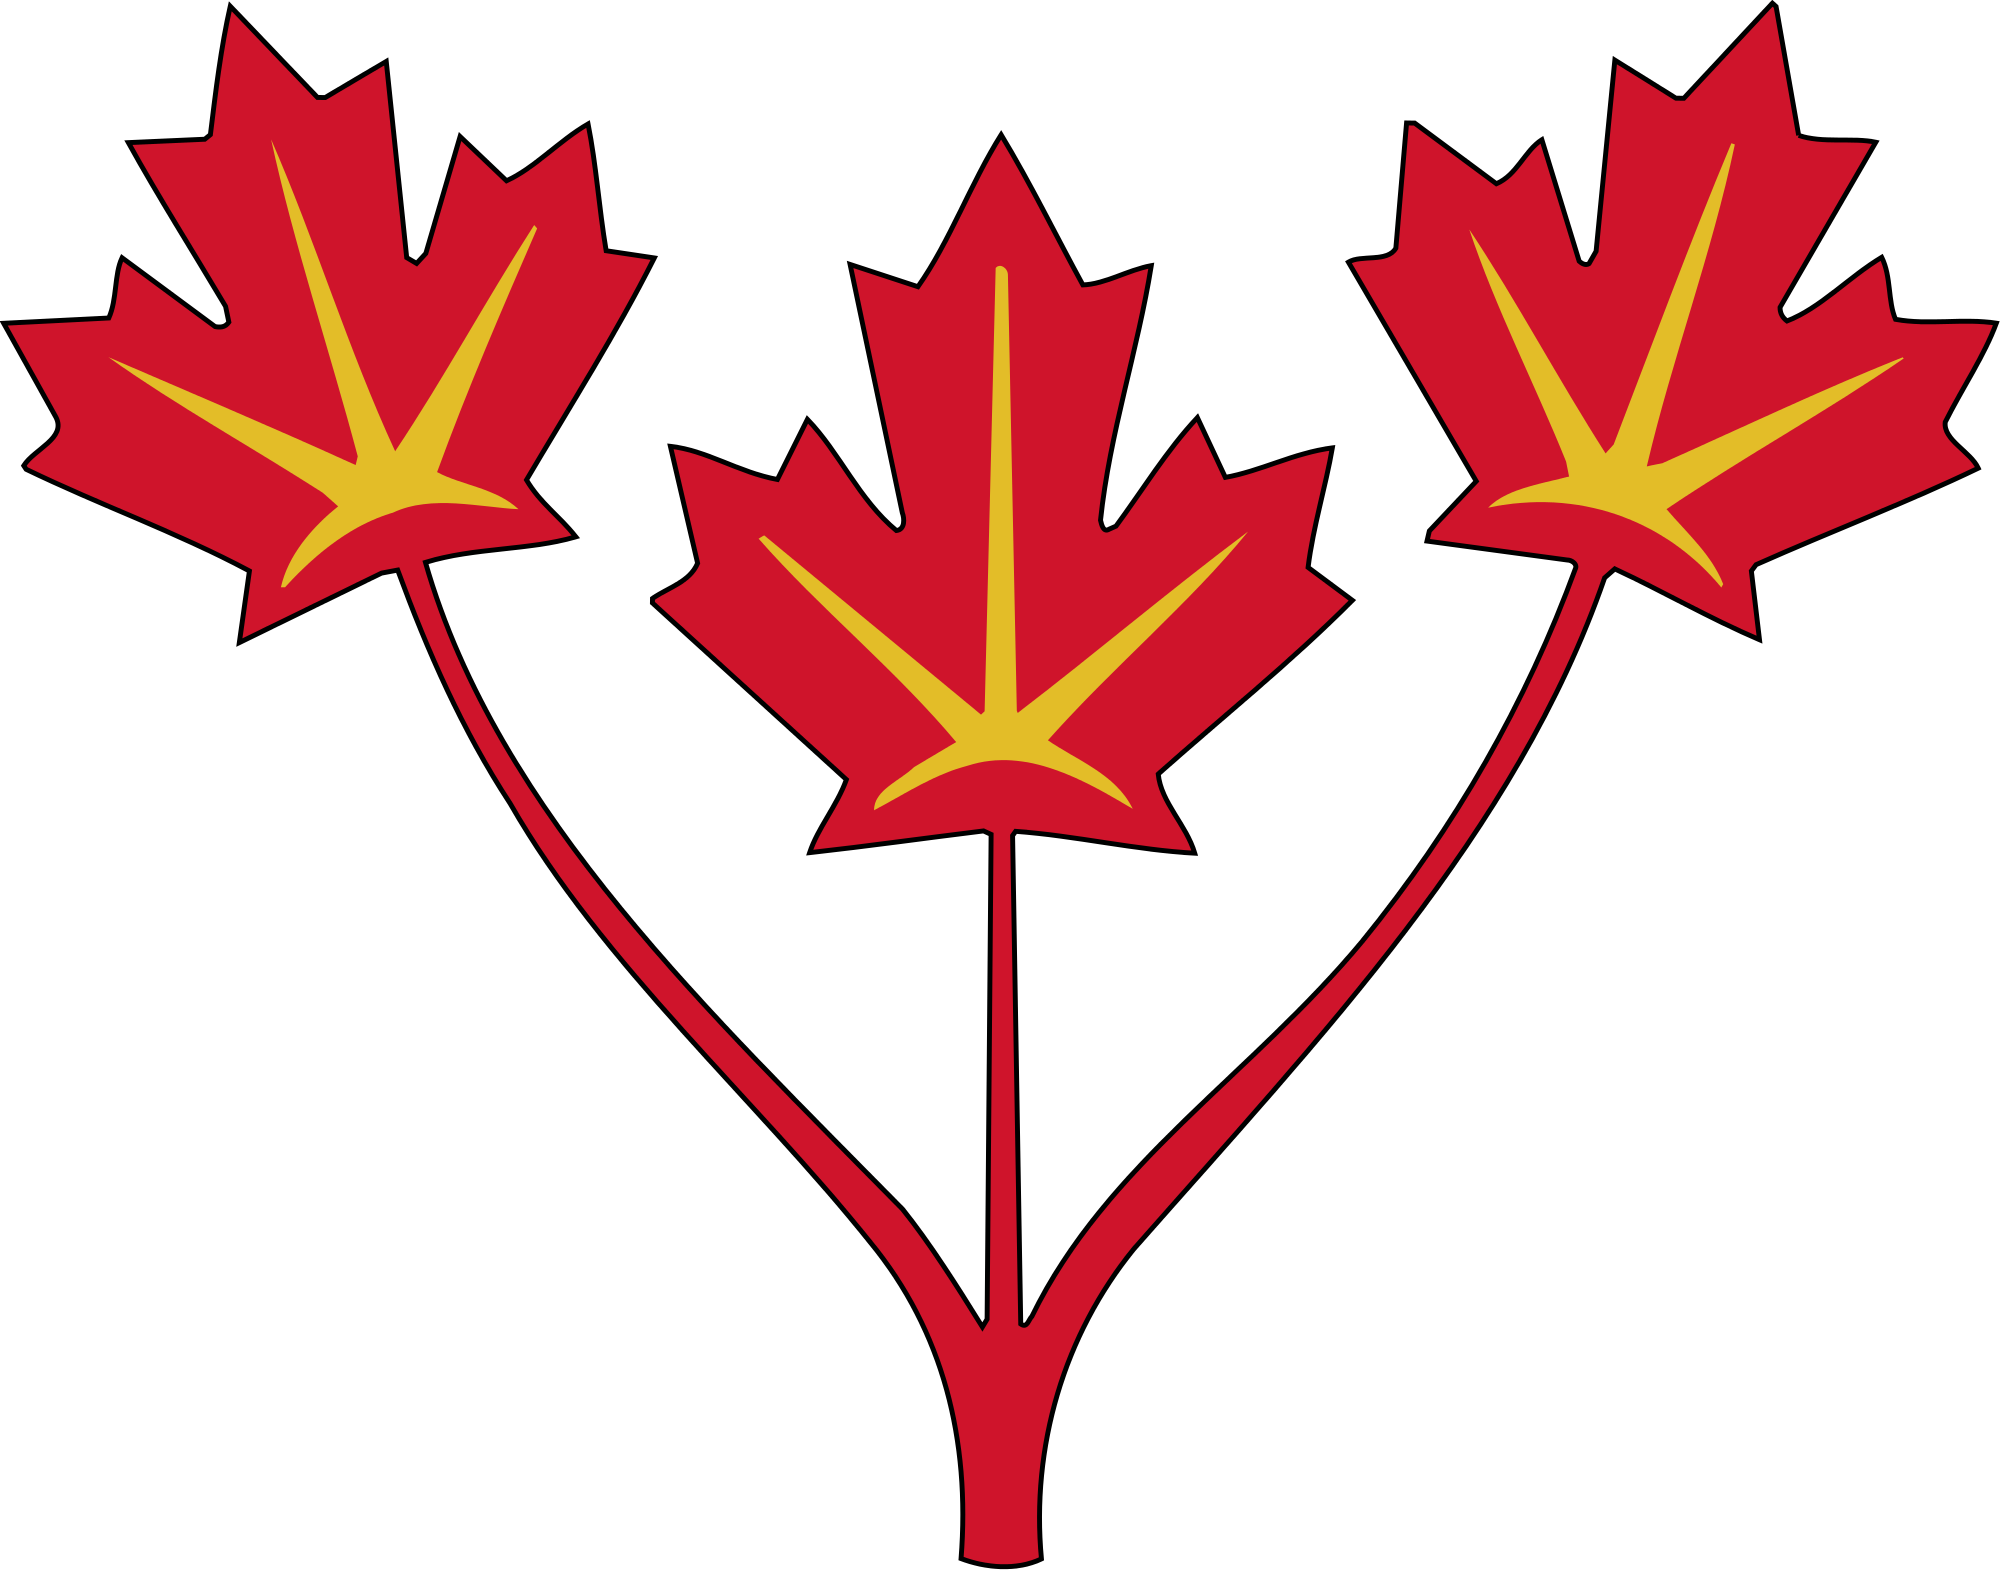 Stylized Maple Leaves Graphic PNG